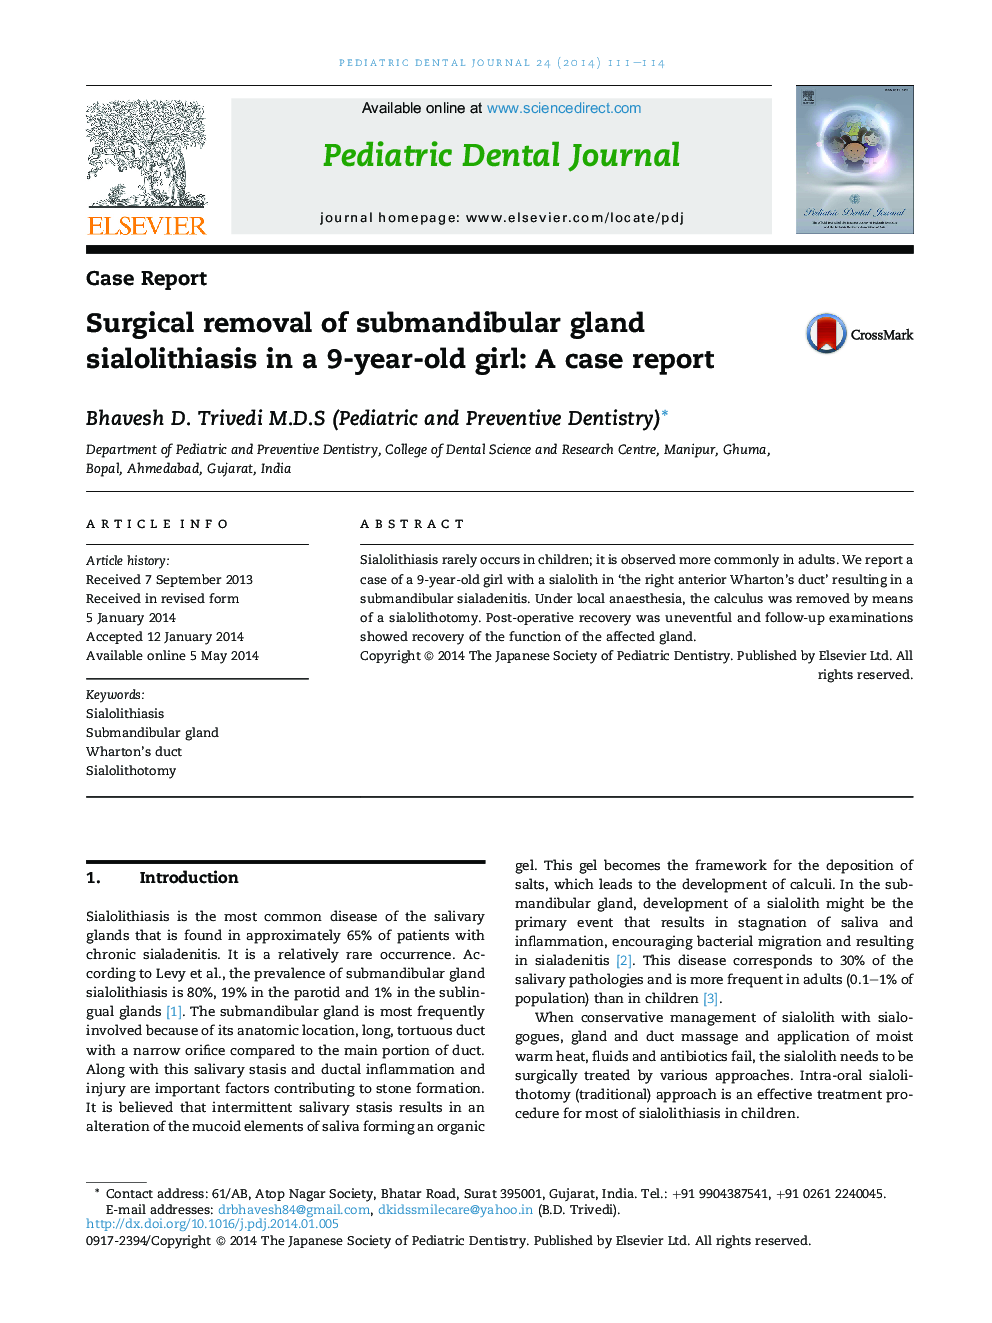 Surgical removal of submandibular gland sialolithiasis in a 9-year-old girl: A case report